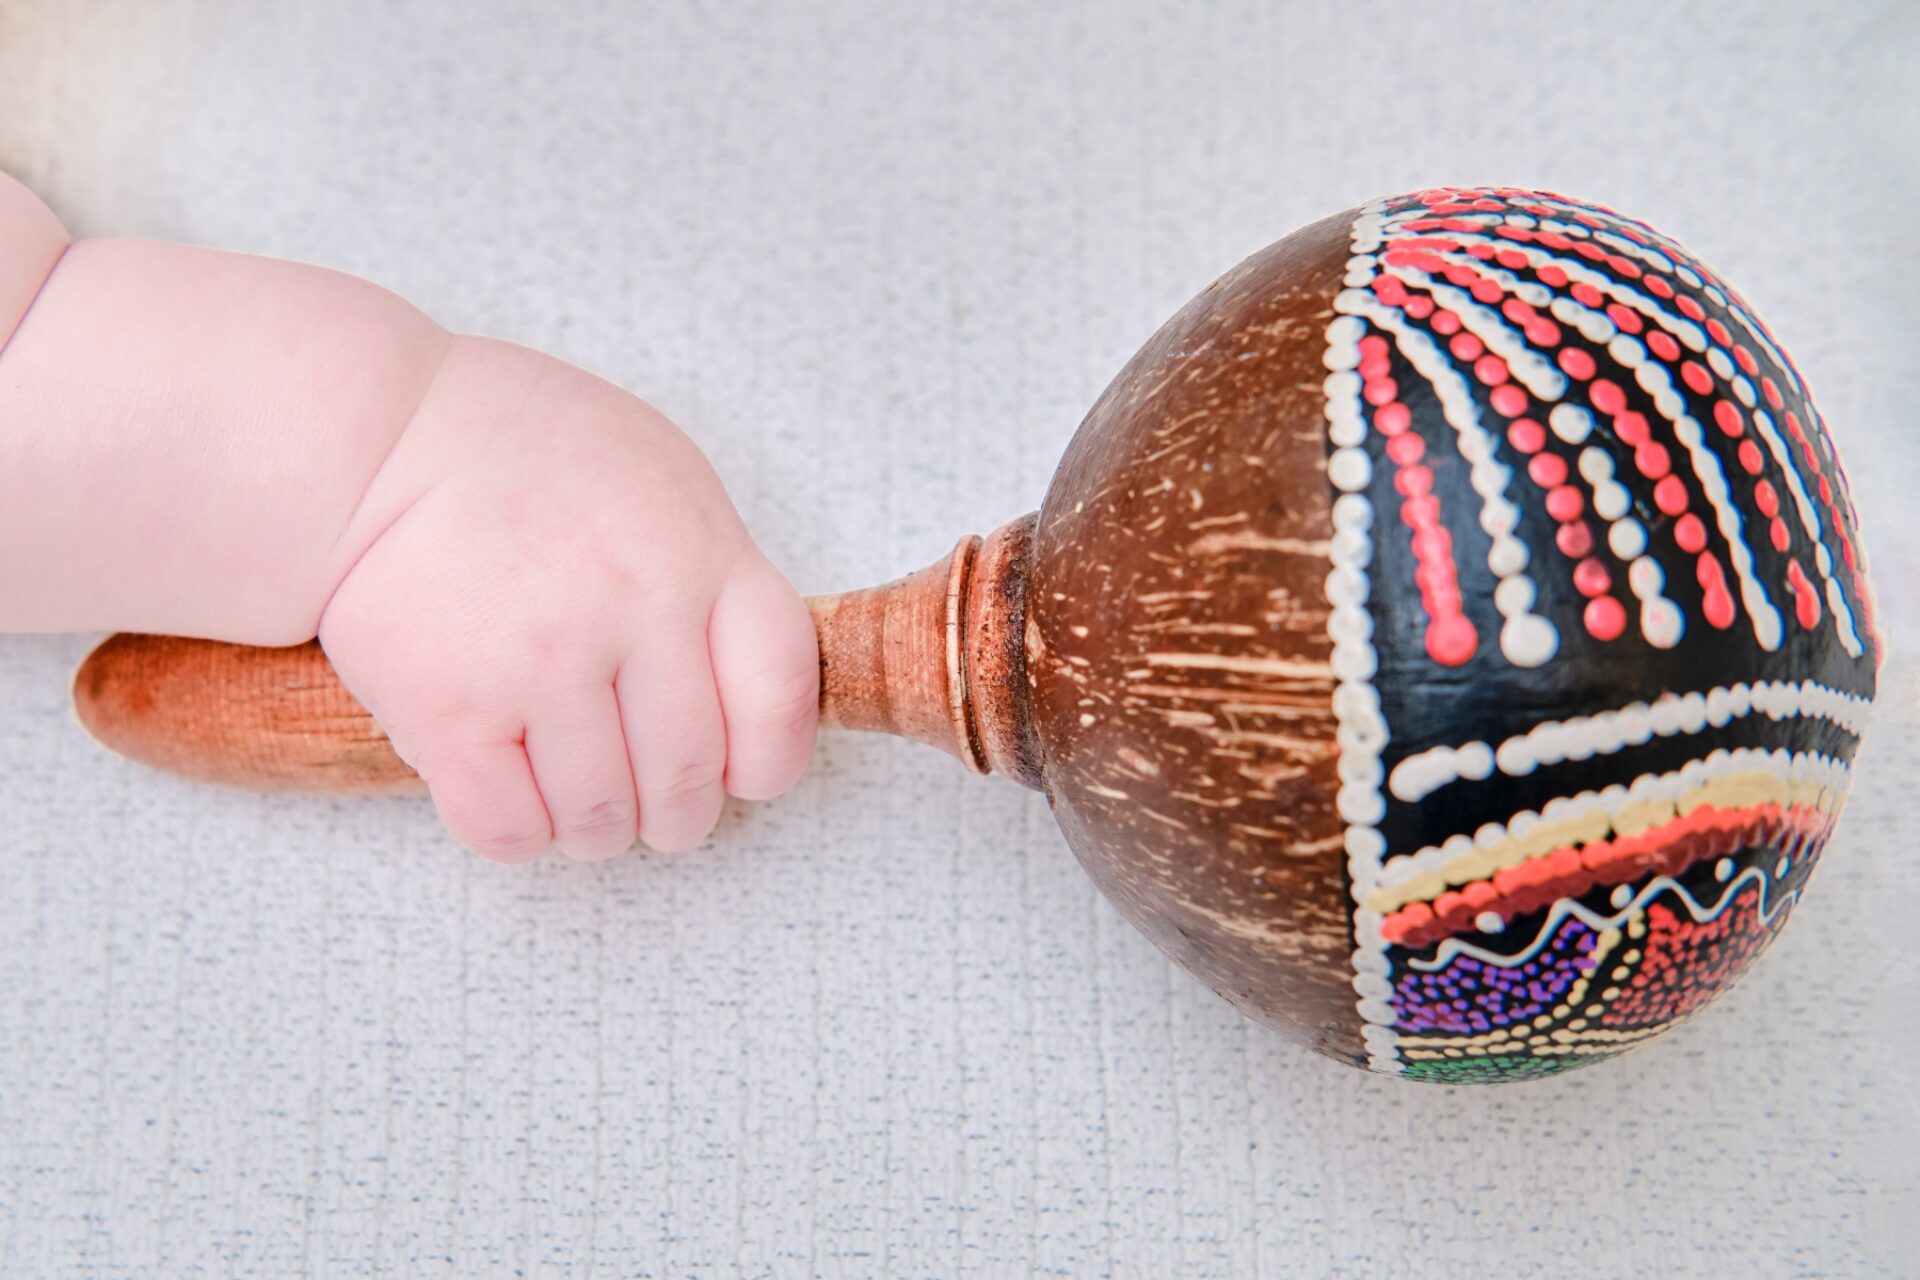 54395349-baby-hand-and-percussion-musical-instrument-close-up